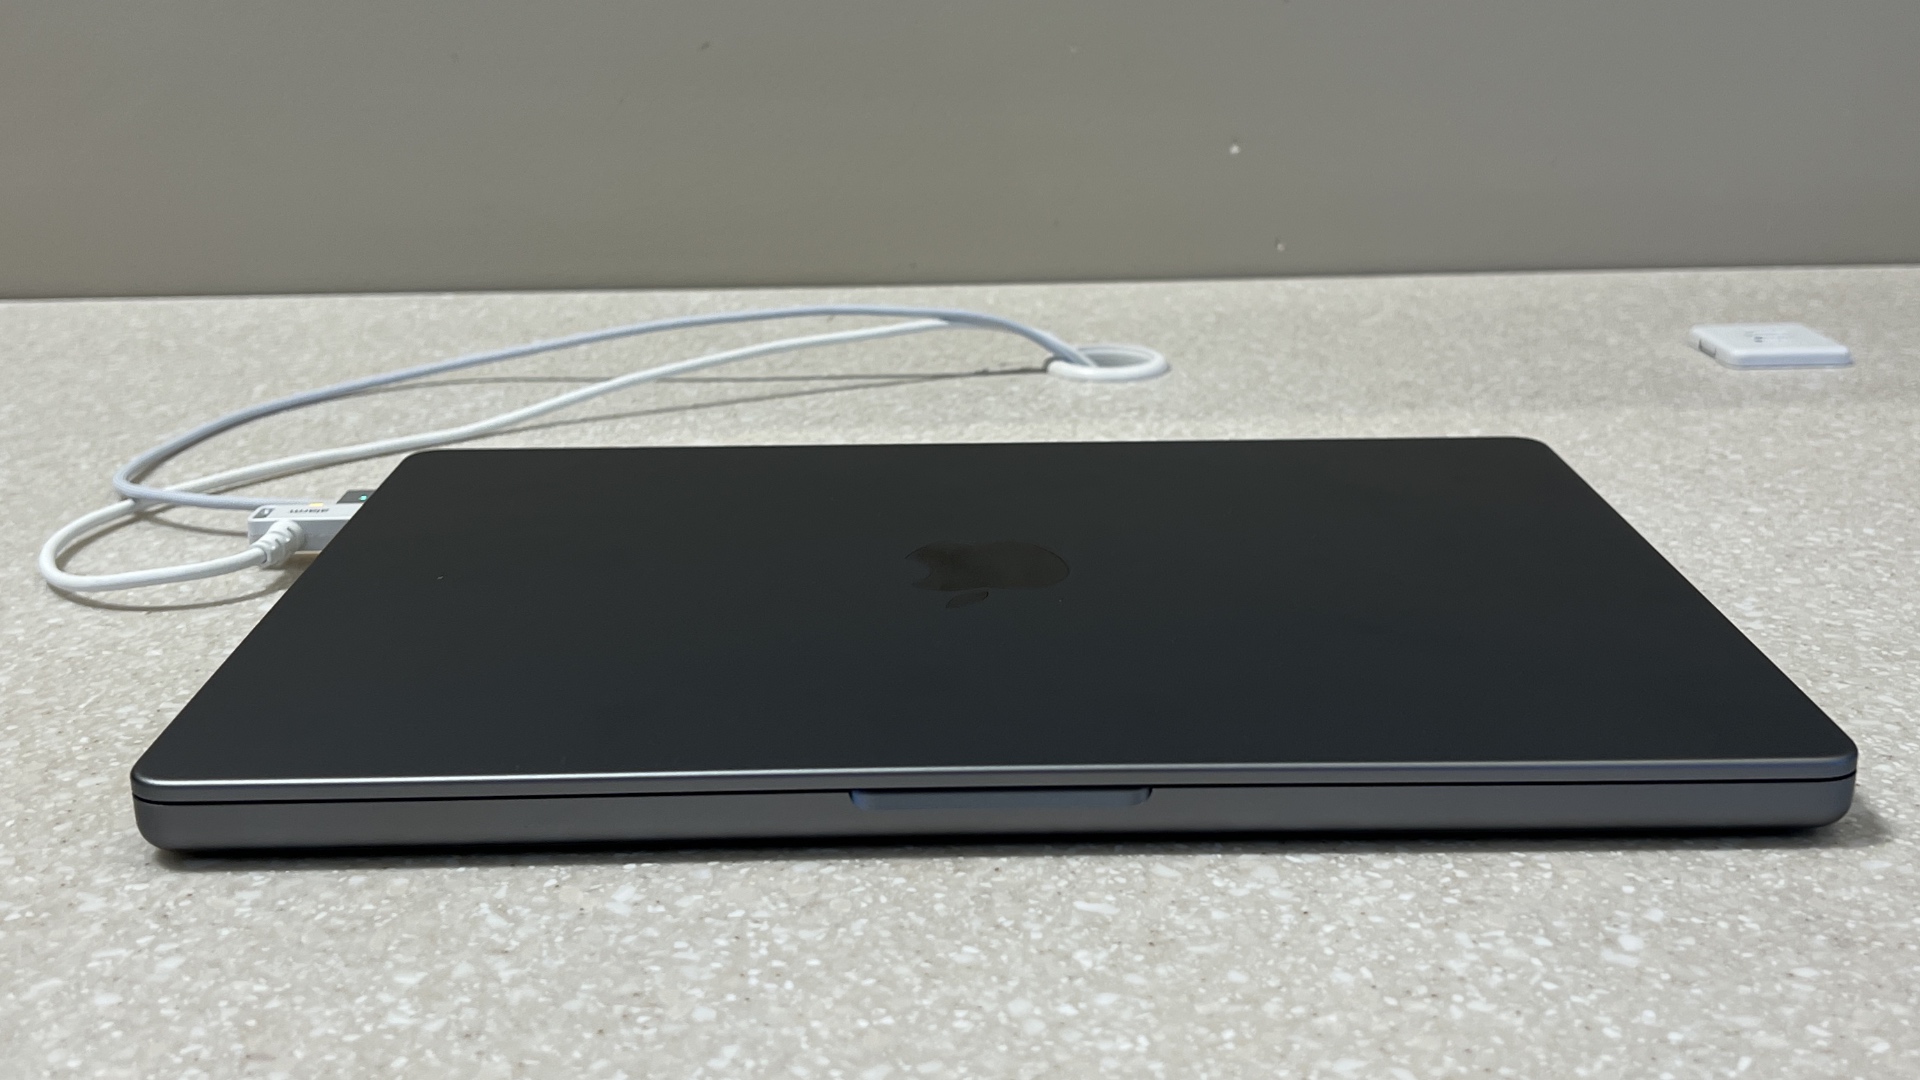 New Images Offer Even Closer Look at New 14-Inch MacBook Pro ...